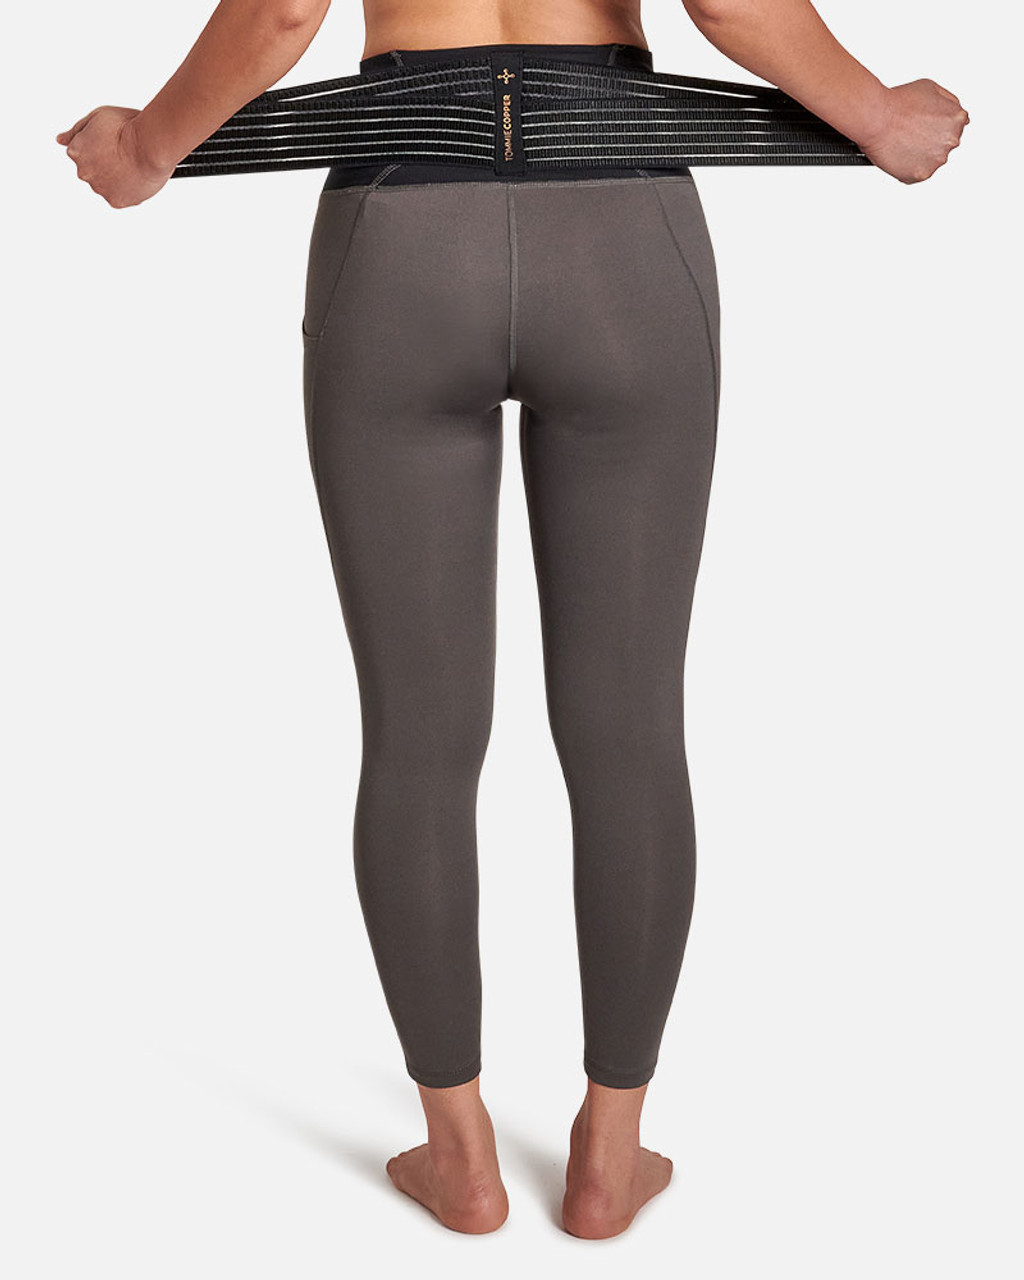 Buy MOREFEEL Leggings with Pockets for Women, High Waisted Tummy